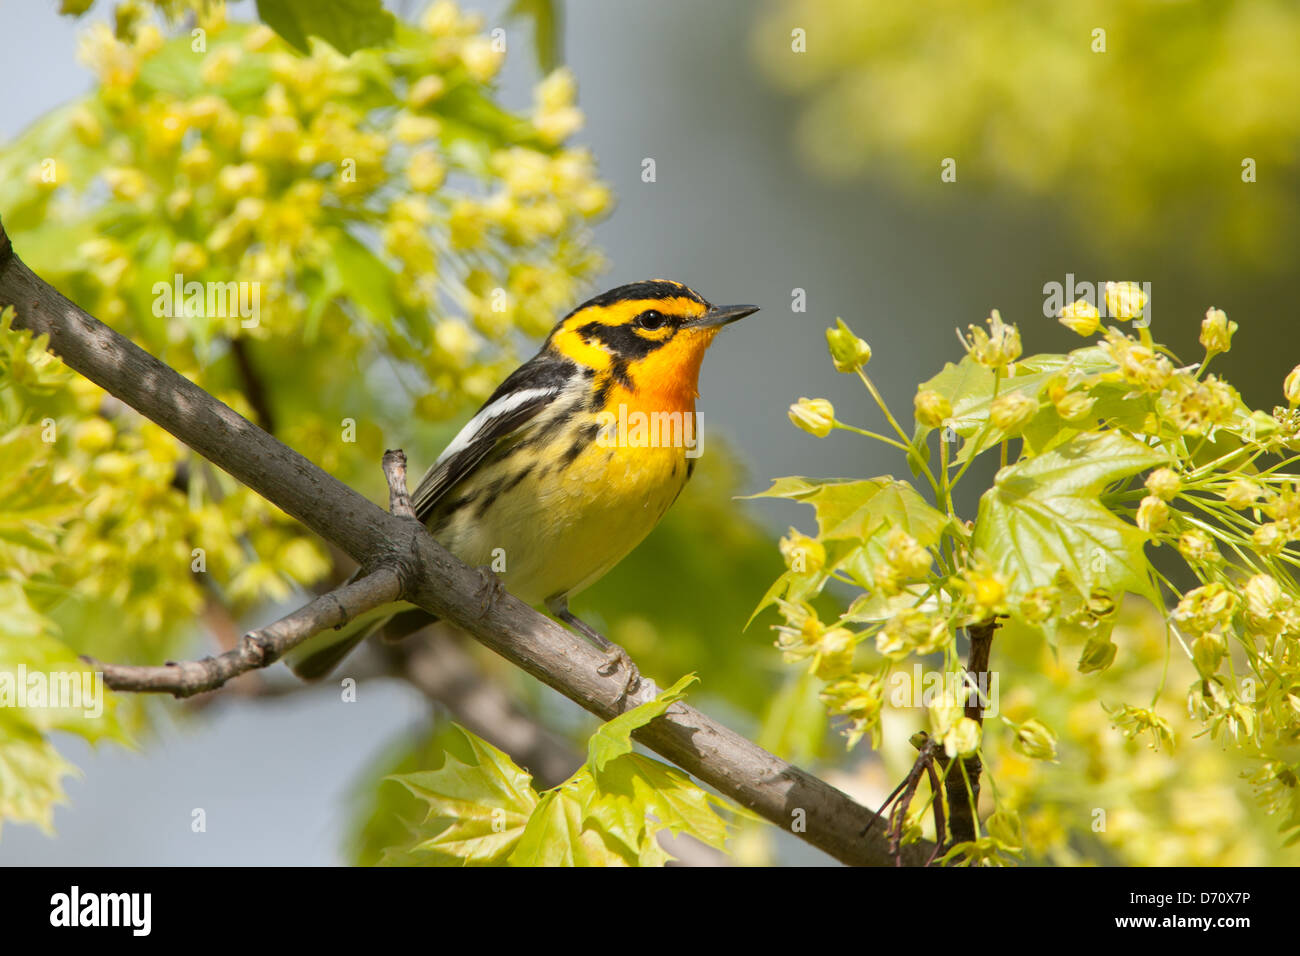 Blackburnian Warbler perching in Maple Tree Blossoms bird songbird Ornithology Science Nature Wildlife Environment Stock Photo